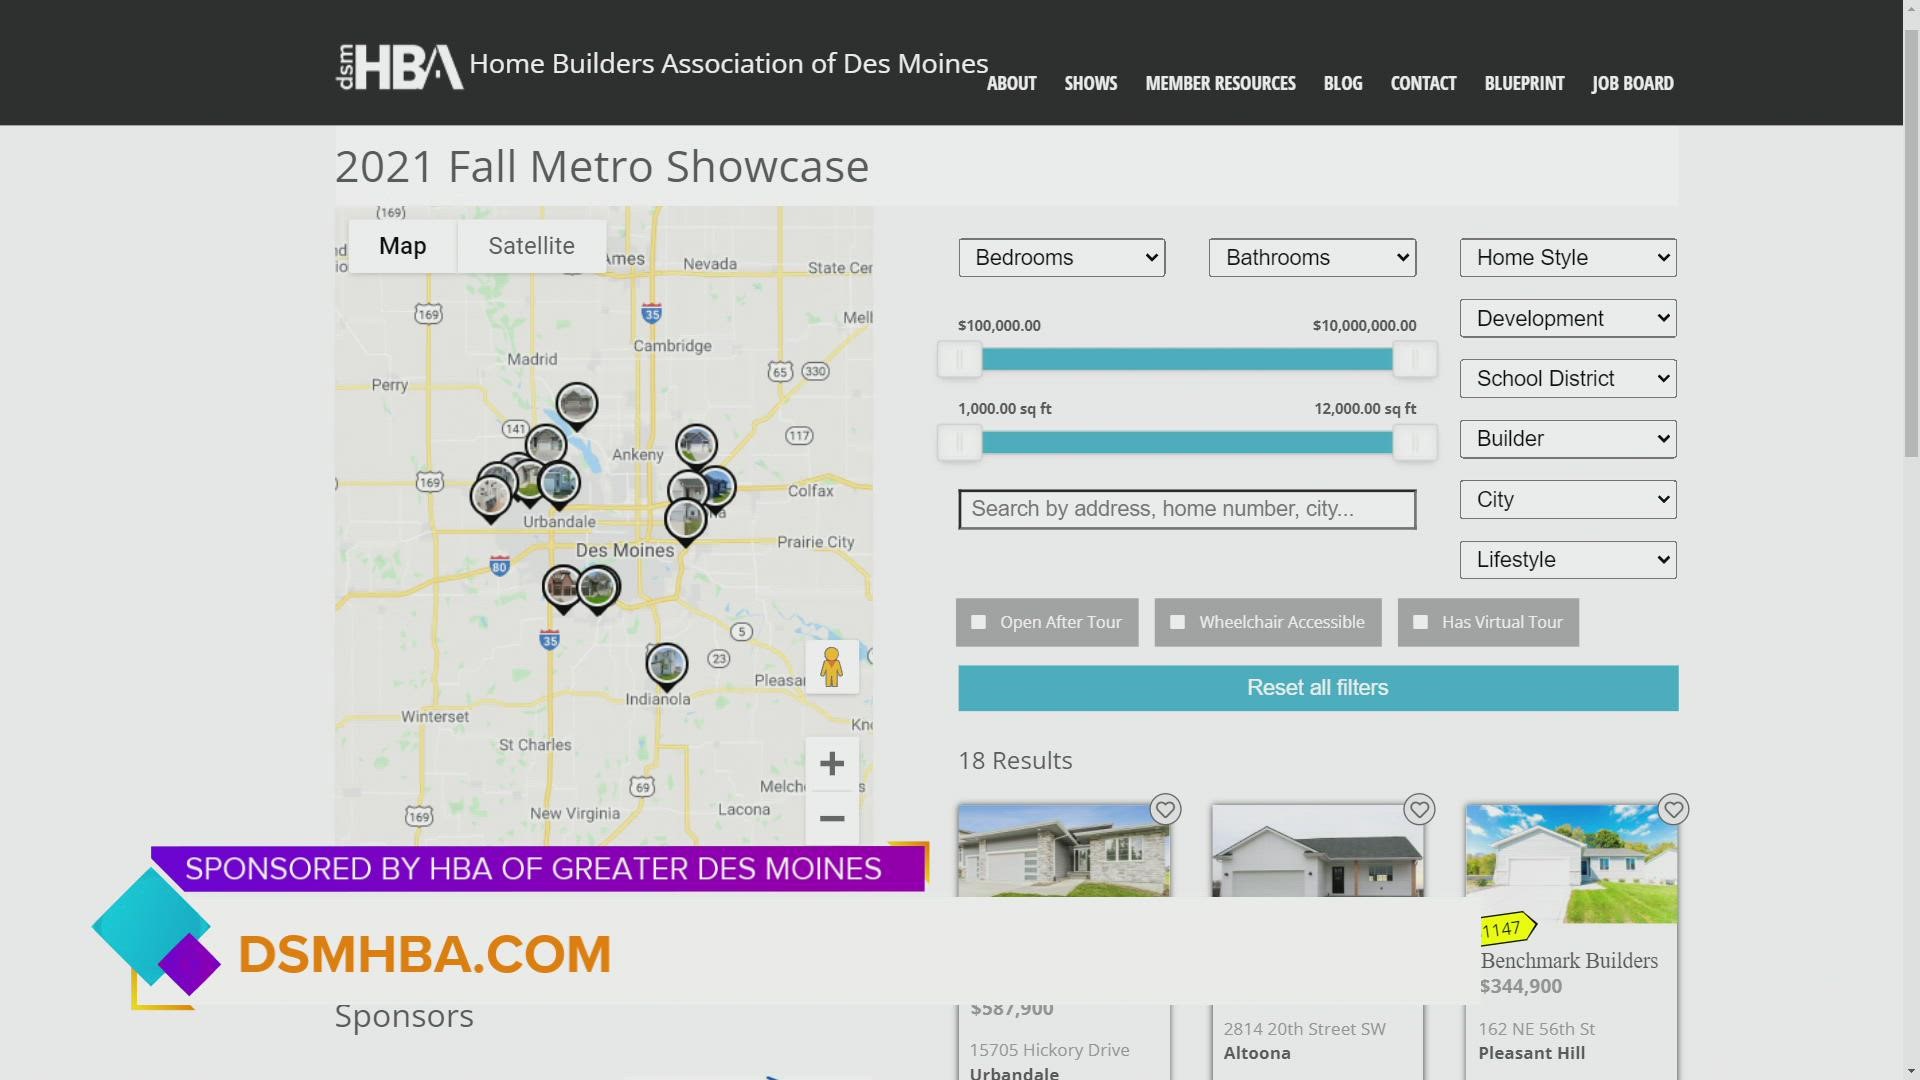 HBA of Greater Des Moines Fall Metro Showcase is October 9-10th and October 16-17th from 10a-4p at 18 area homes and is FREE to attend | Paid Content